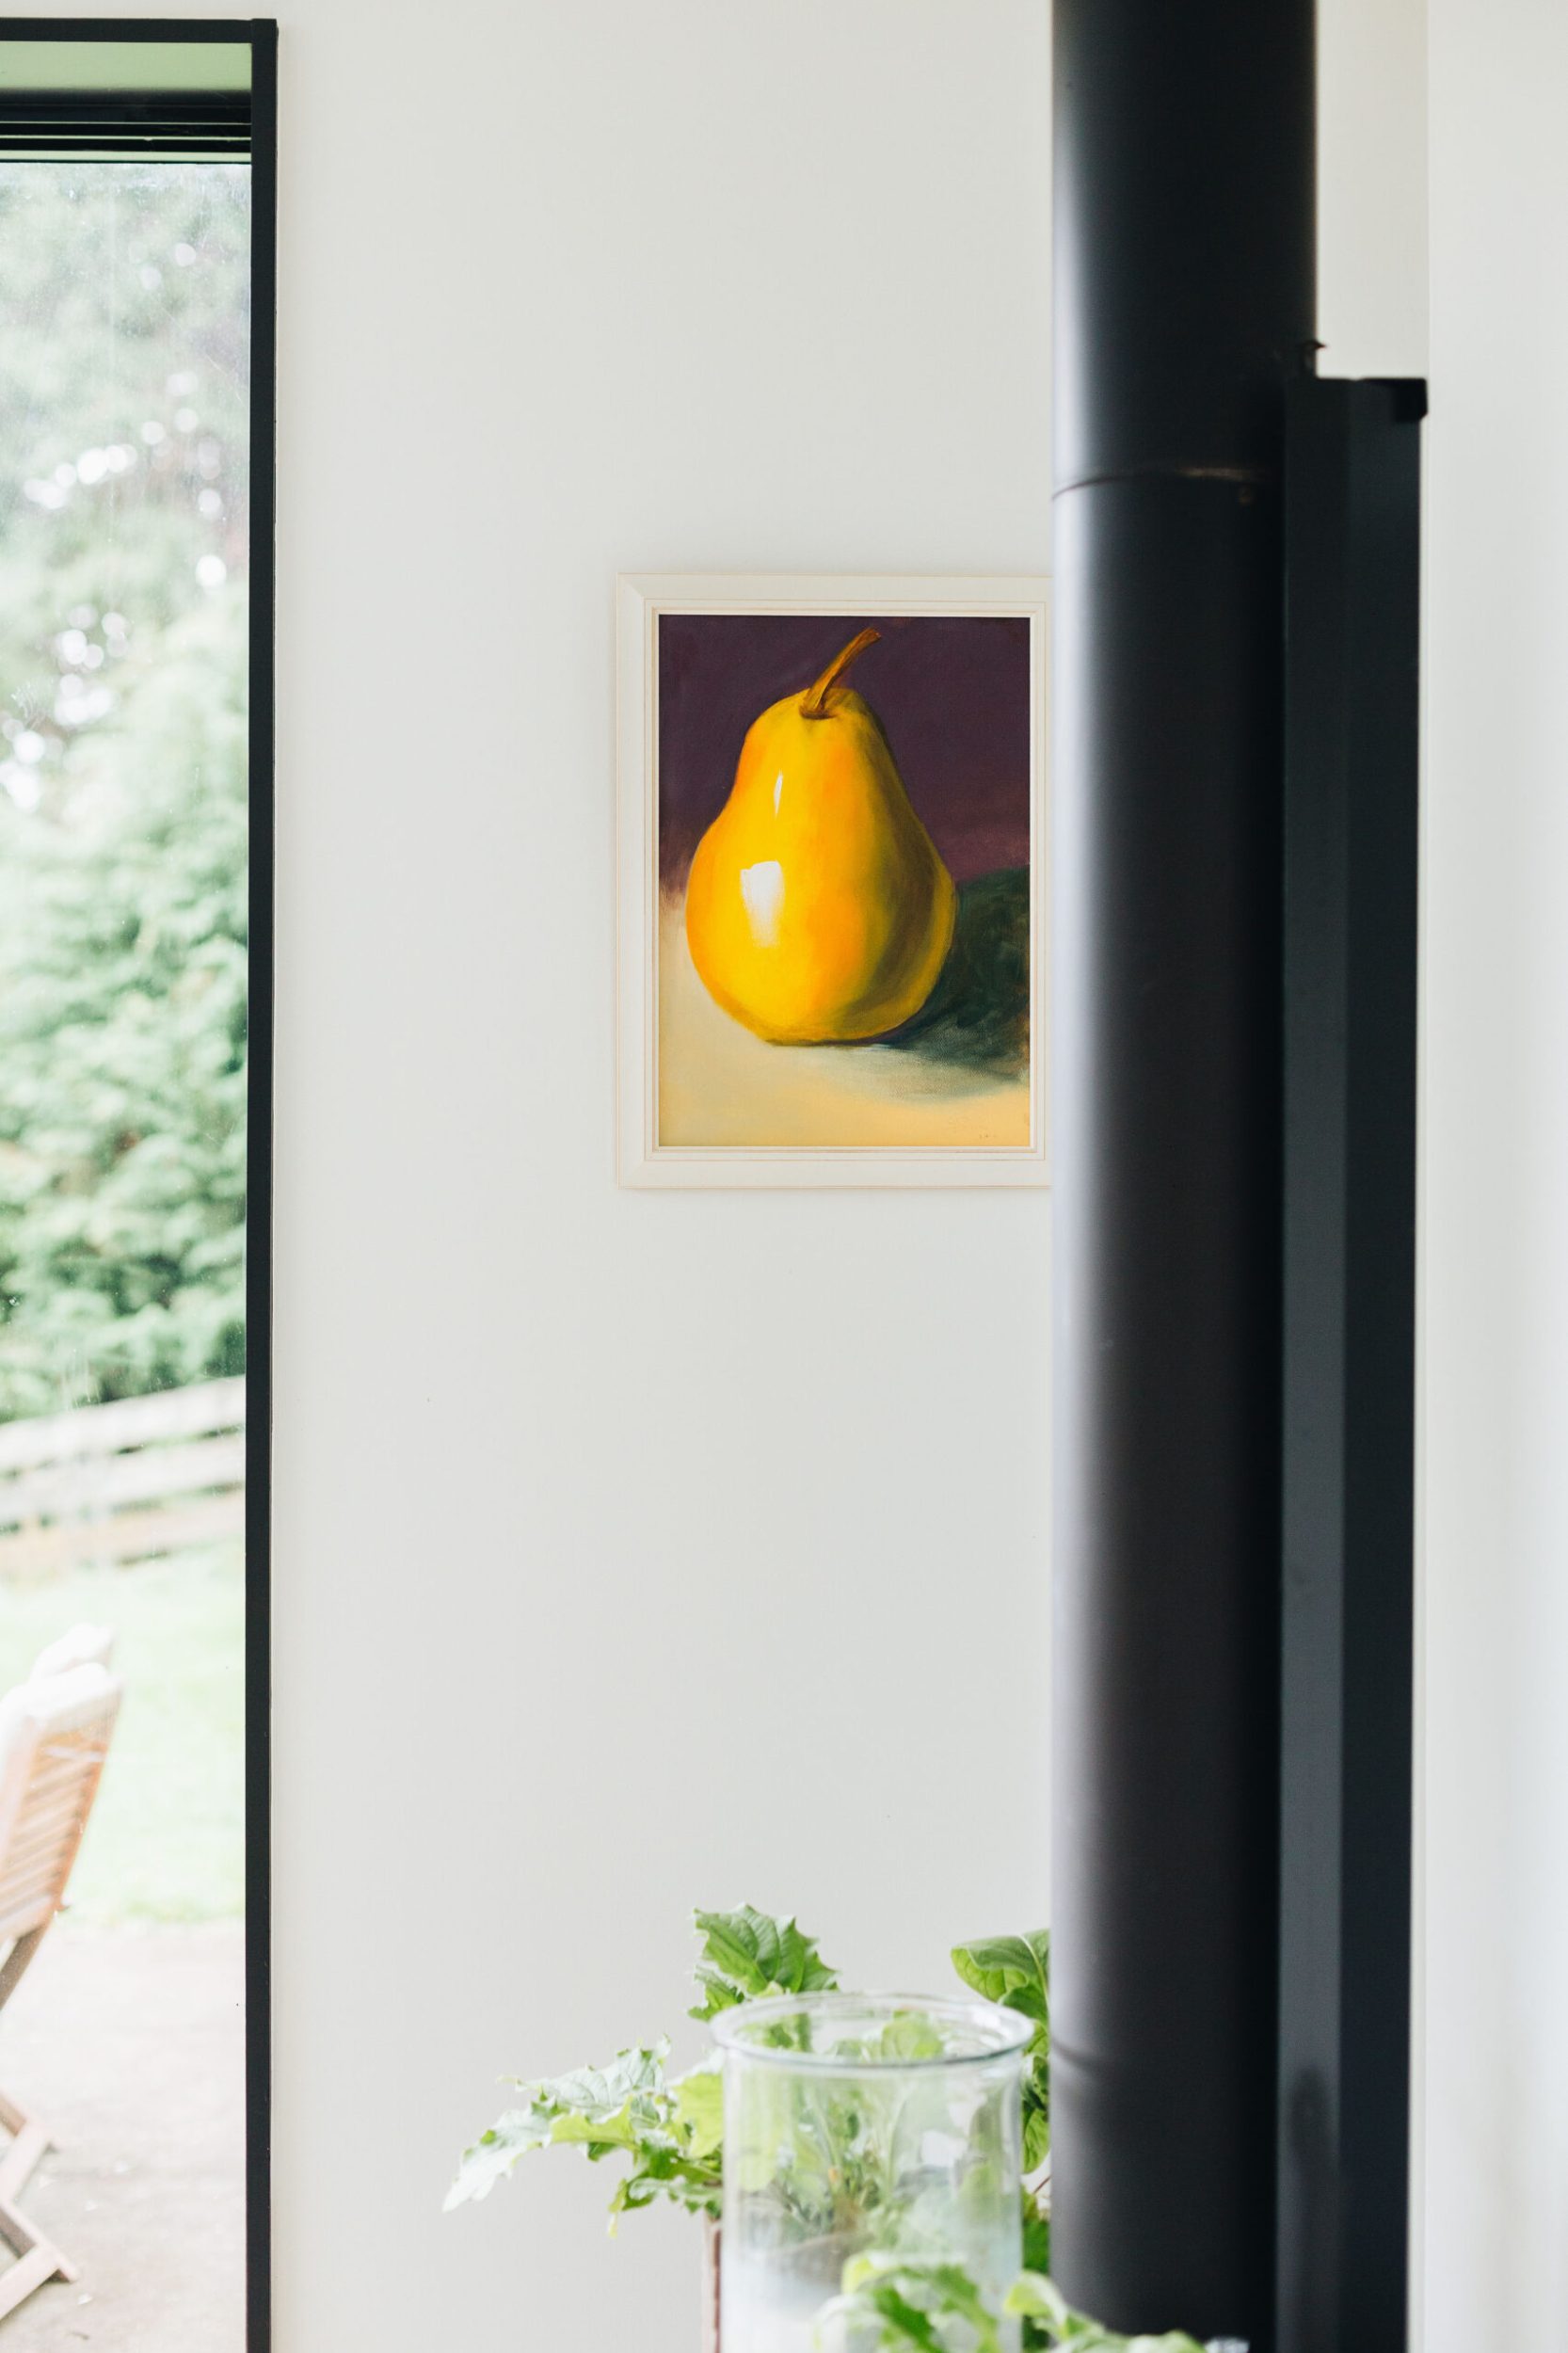 A painting of a yellow pear hanging on a white wall next to a black fireplace chute